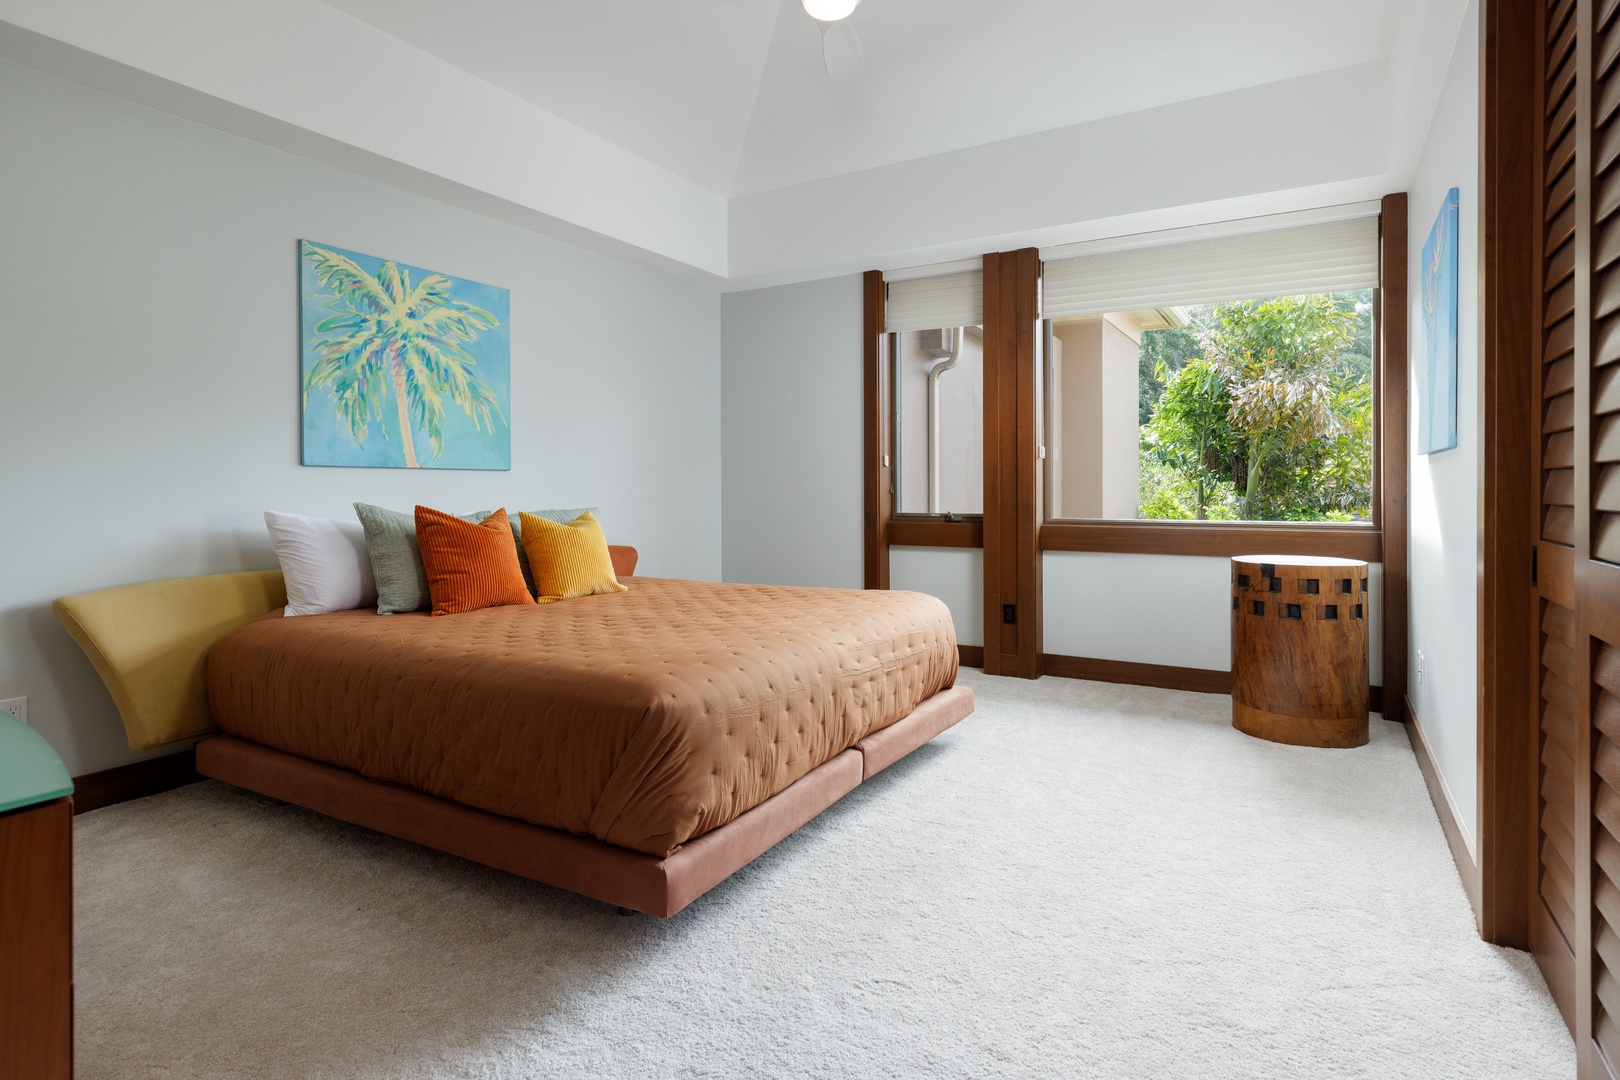 Kailua Kona Vacation Rentals, Fairway Villa 104A - The third guest bedroom with King bed and ensuite.